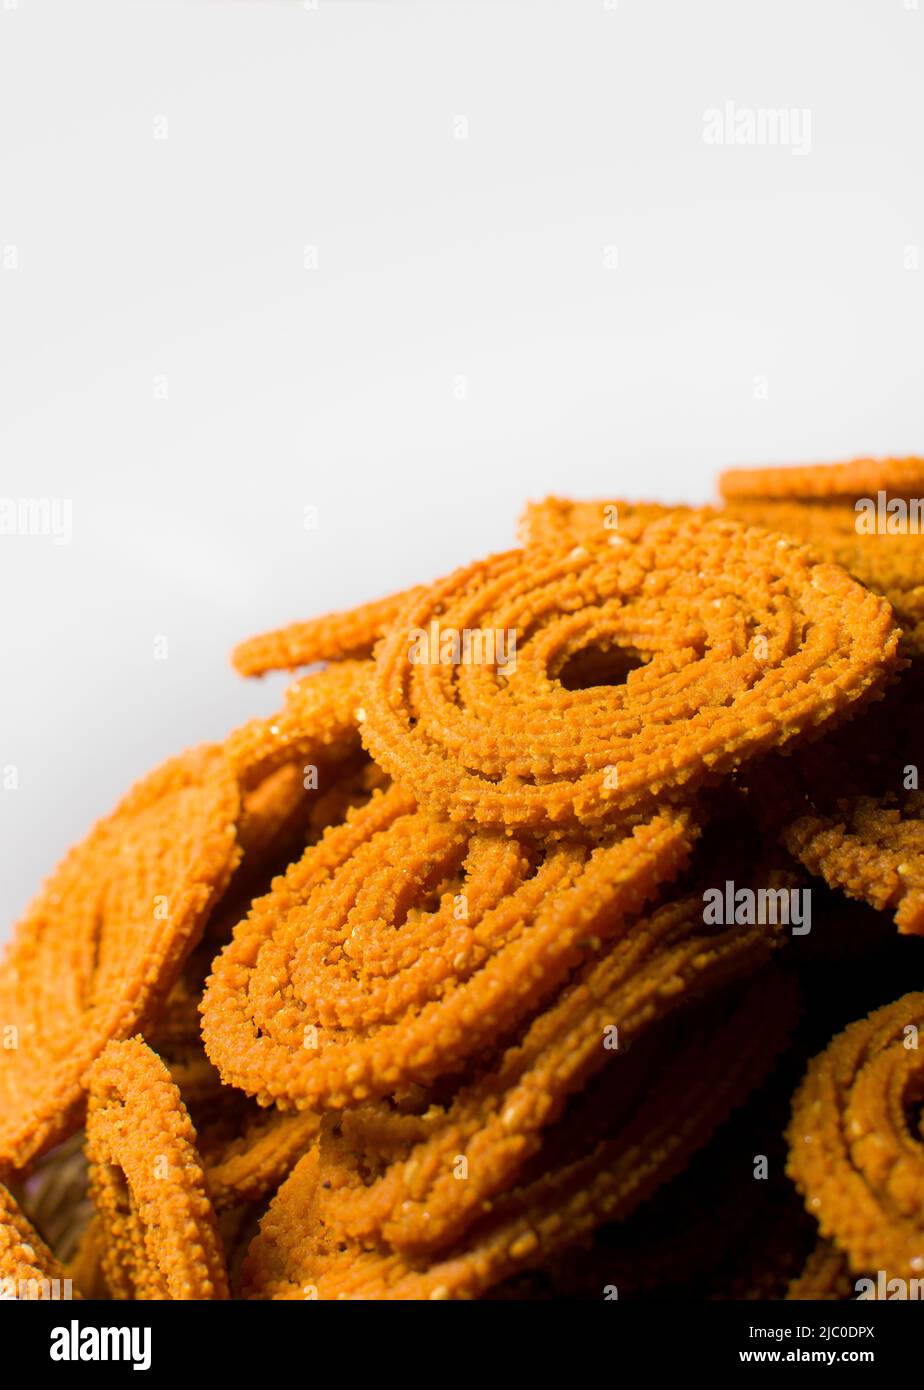 It is spiral and spiked surface Indian snack known as Chakli which made of Bengal gram flour and spices. It is made during Diwali festival. Stock Photo